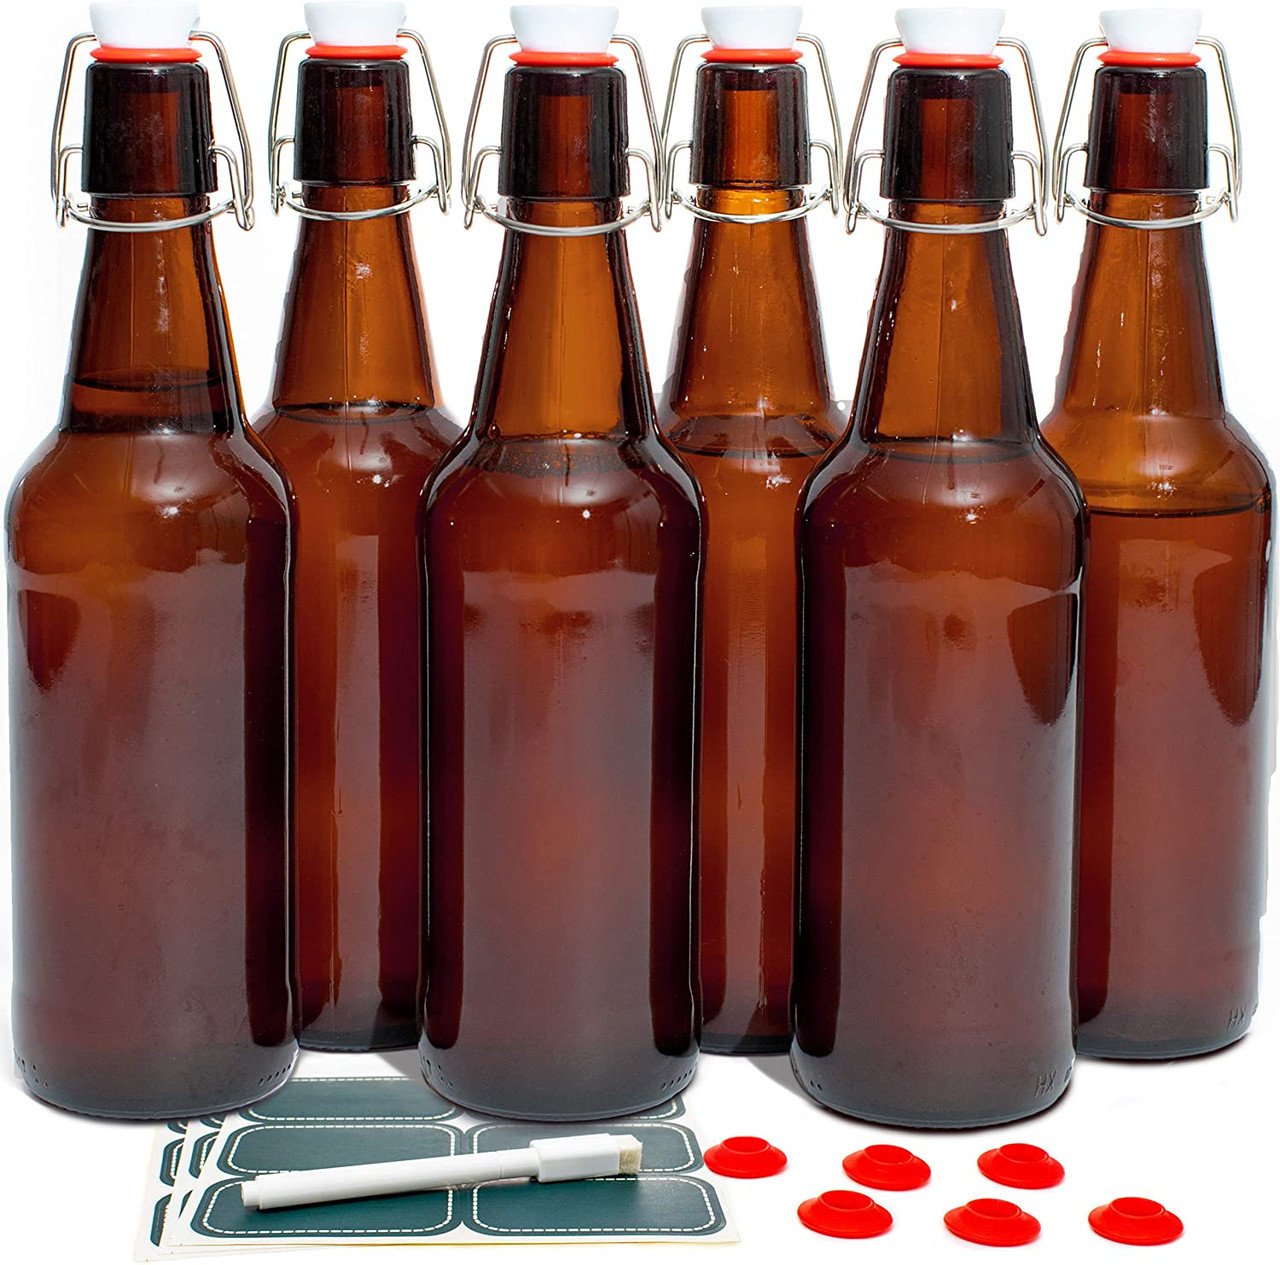 Otis Classic Swing Top Glass Bottles - Set of 6, 16oz w/Marker & Labels -  Clear Bottle with Caps for Juice, Water, Kombucha, Wine, Beer Brewing,  Kefir